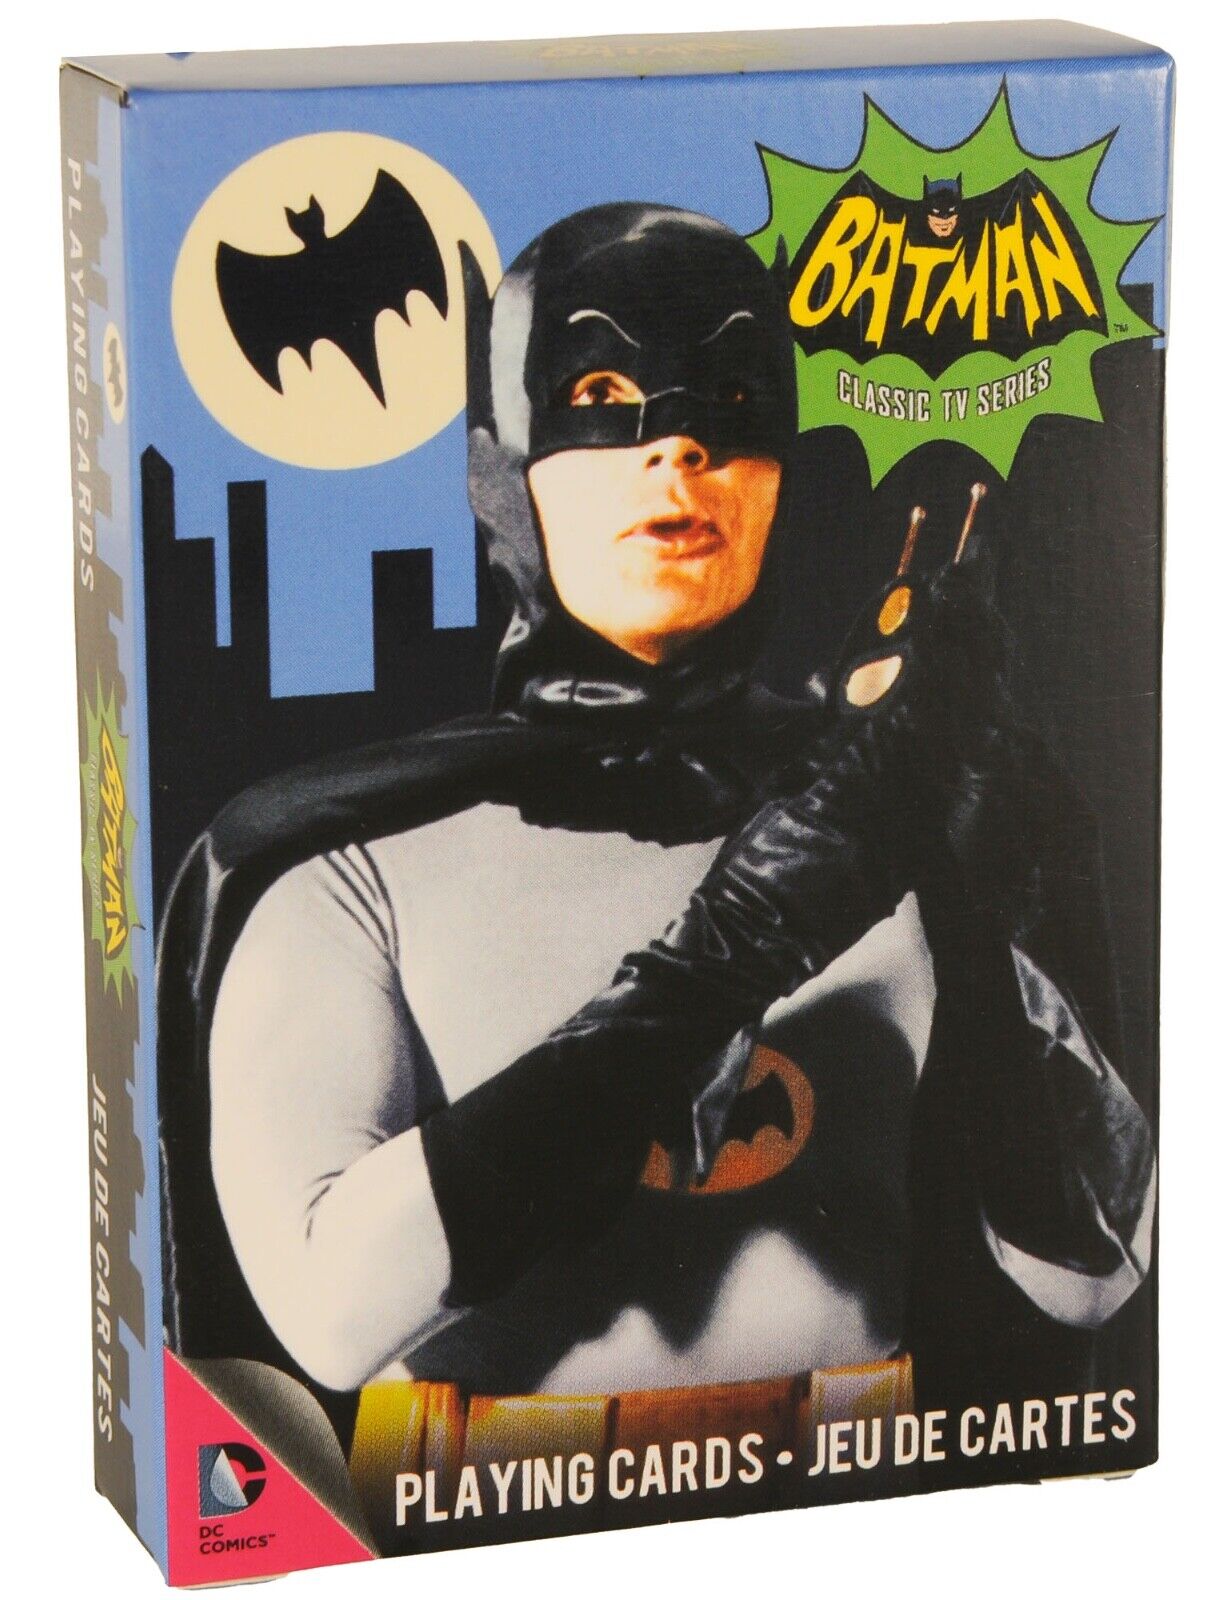 Batman DC Classic TV Series Themed Playing Cards - New Factory Sealed